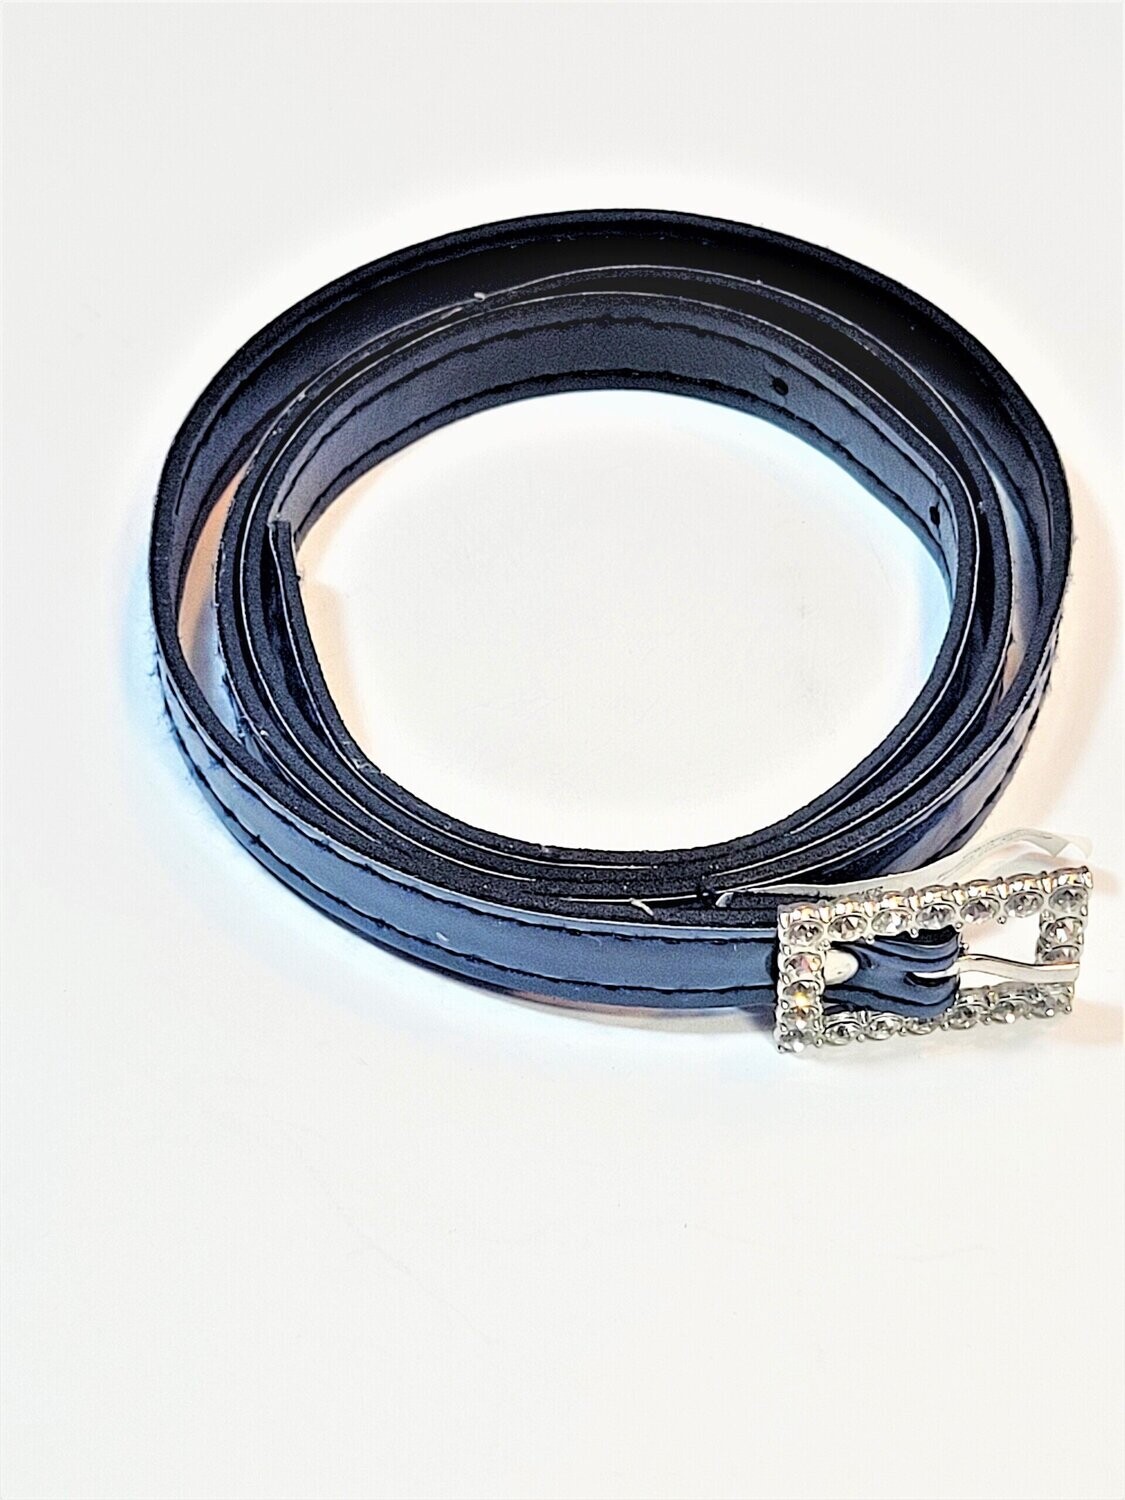 Black Cobra Skin Belts with Stones for Girls for Dress Gown jeans